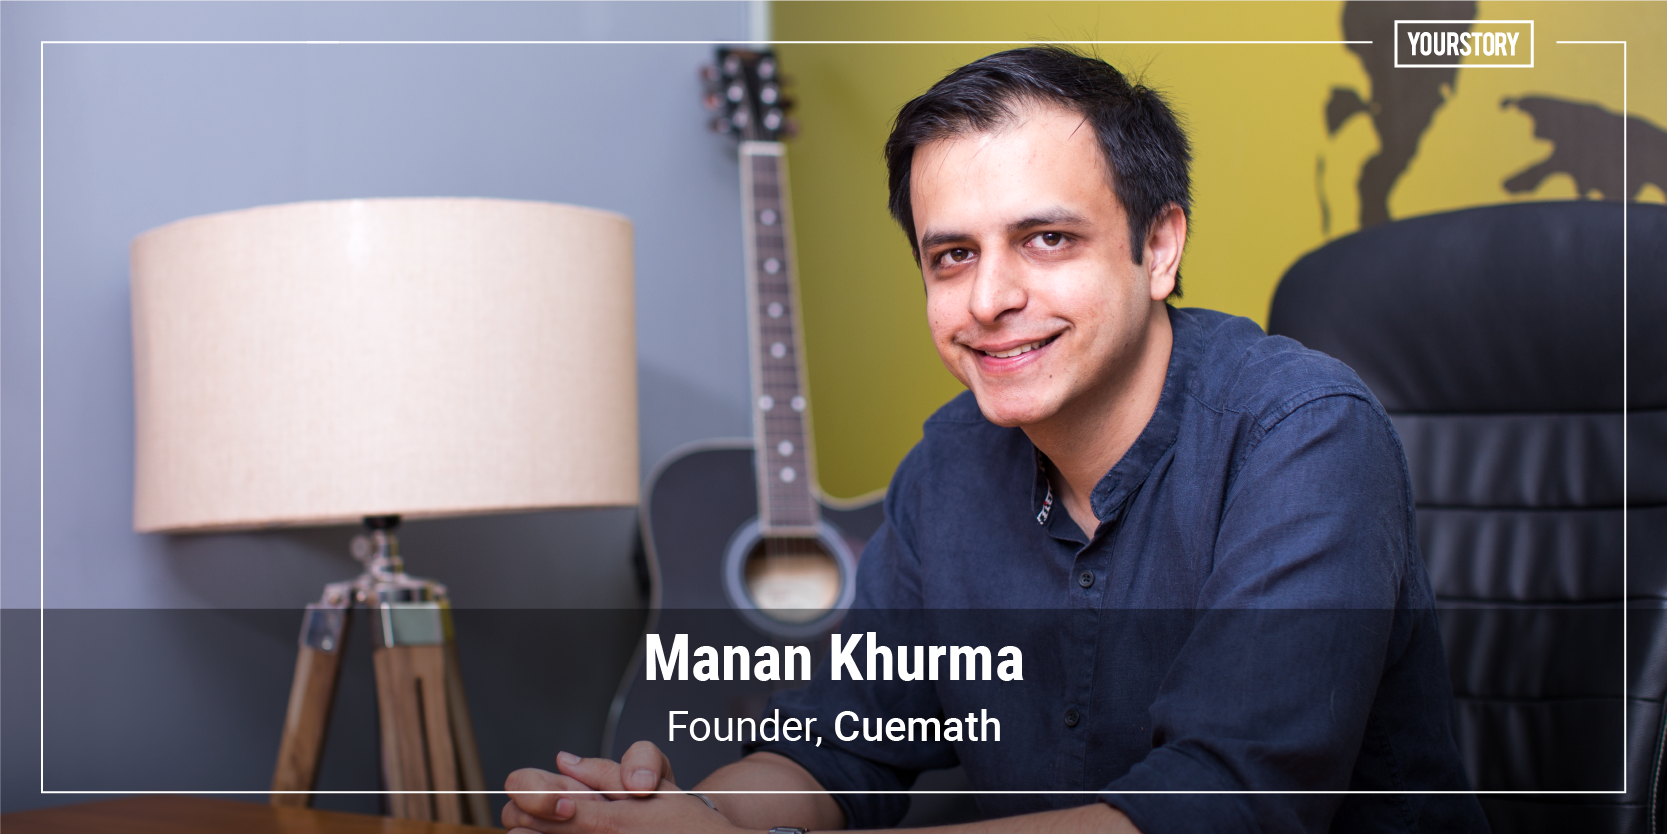 Inside Cuemath’s global expansion: How the Google-backed edtech startup aims to reach $100M revenue, 1B math minds in 50 countries